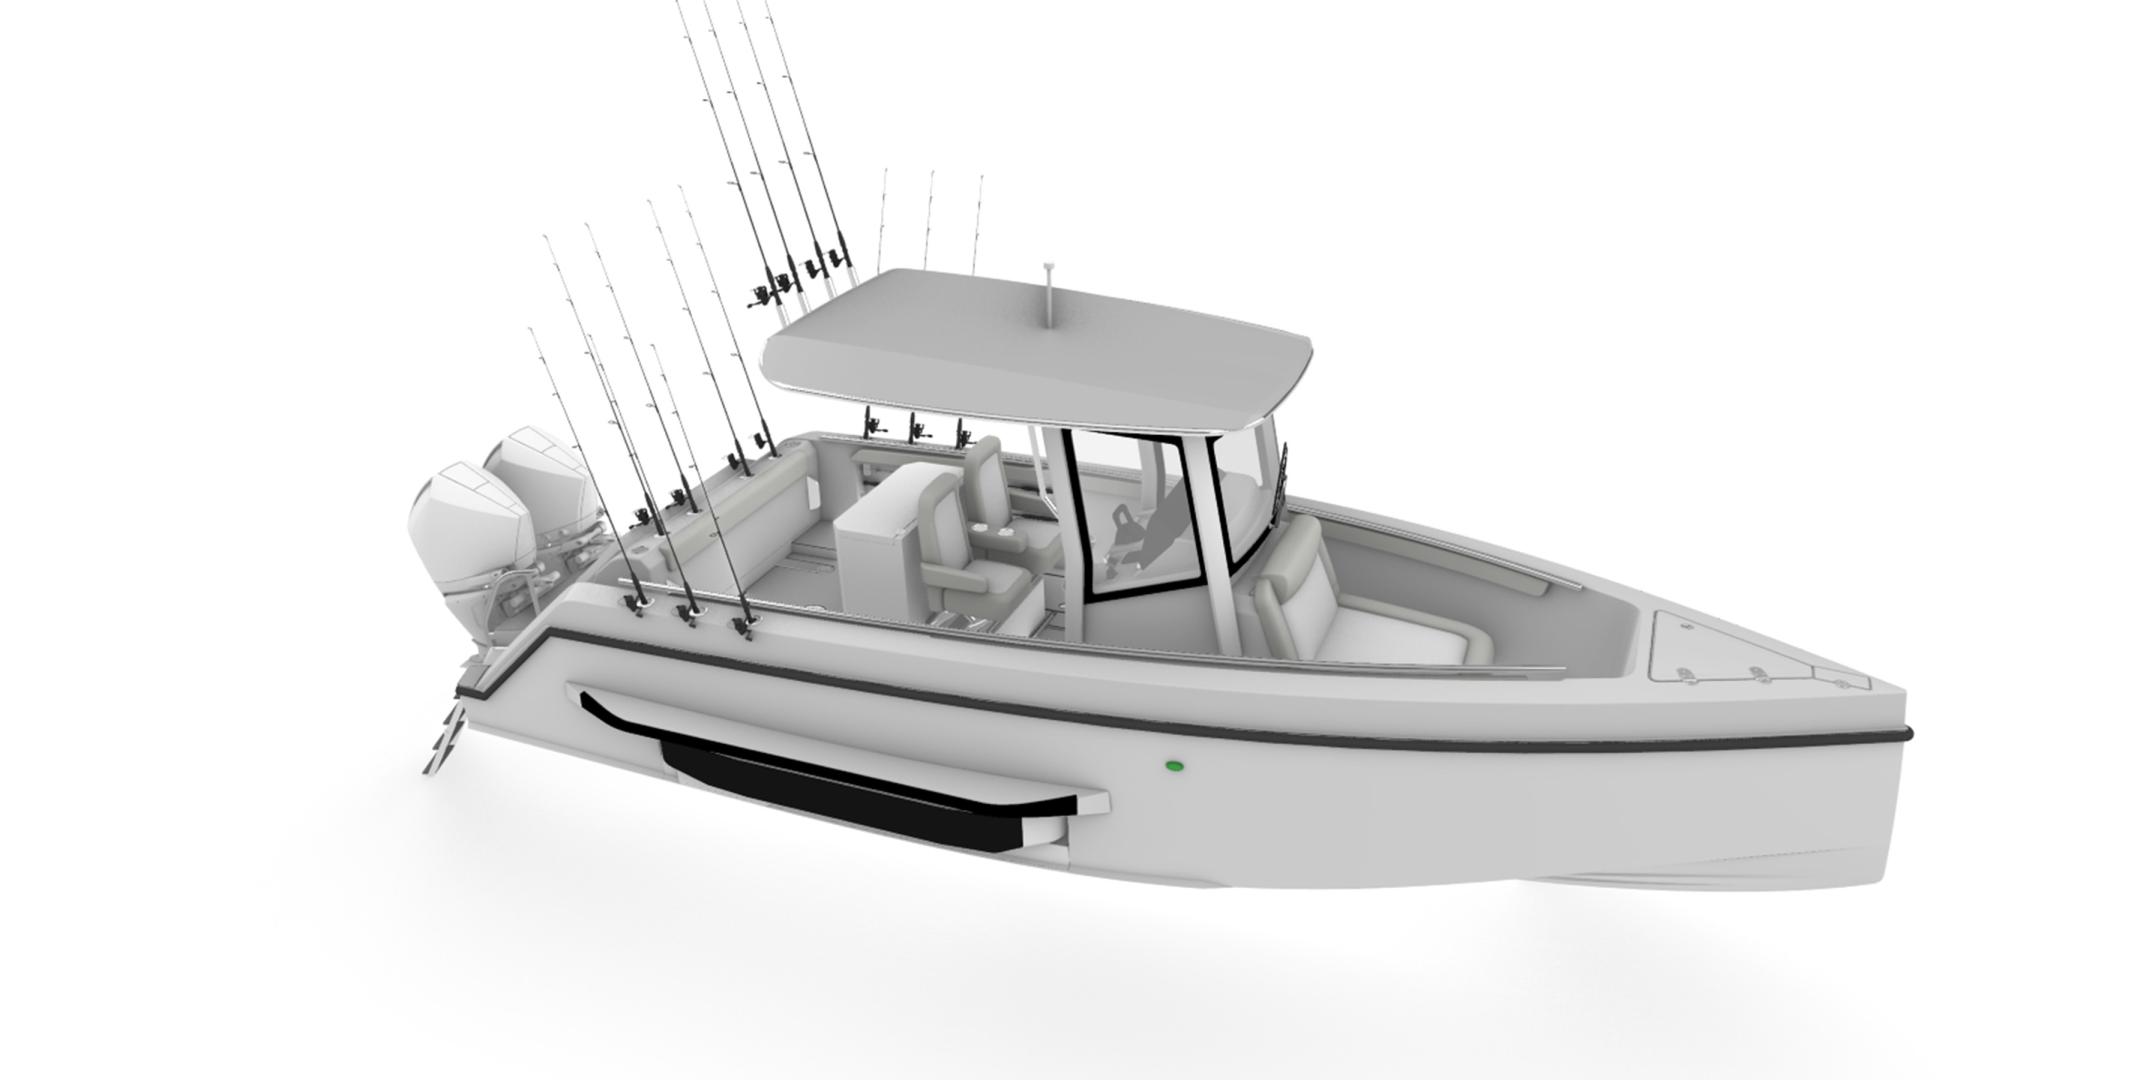 Pressmare  Iguana Yachts, X-Fisher: The First Amphibious Boat For Fishing